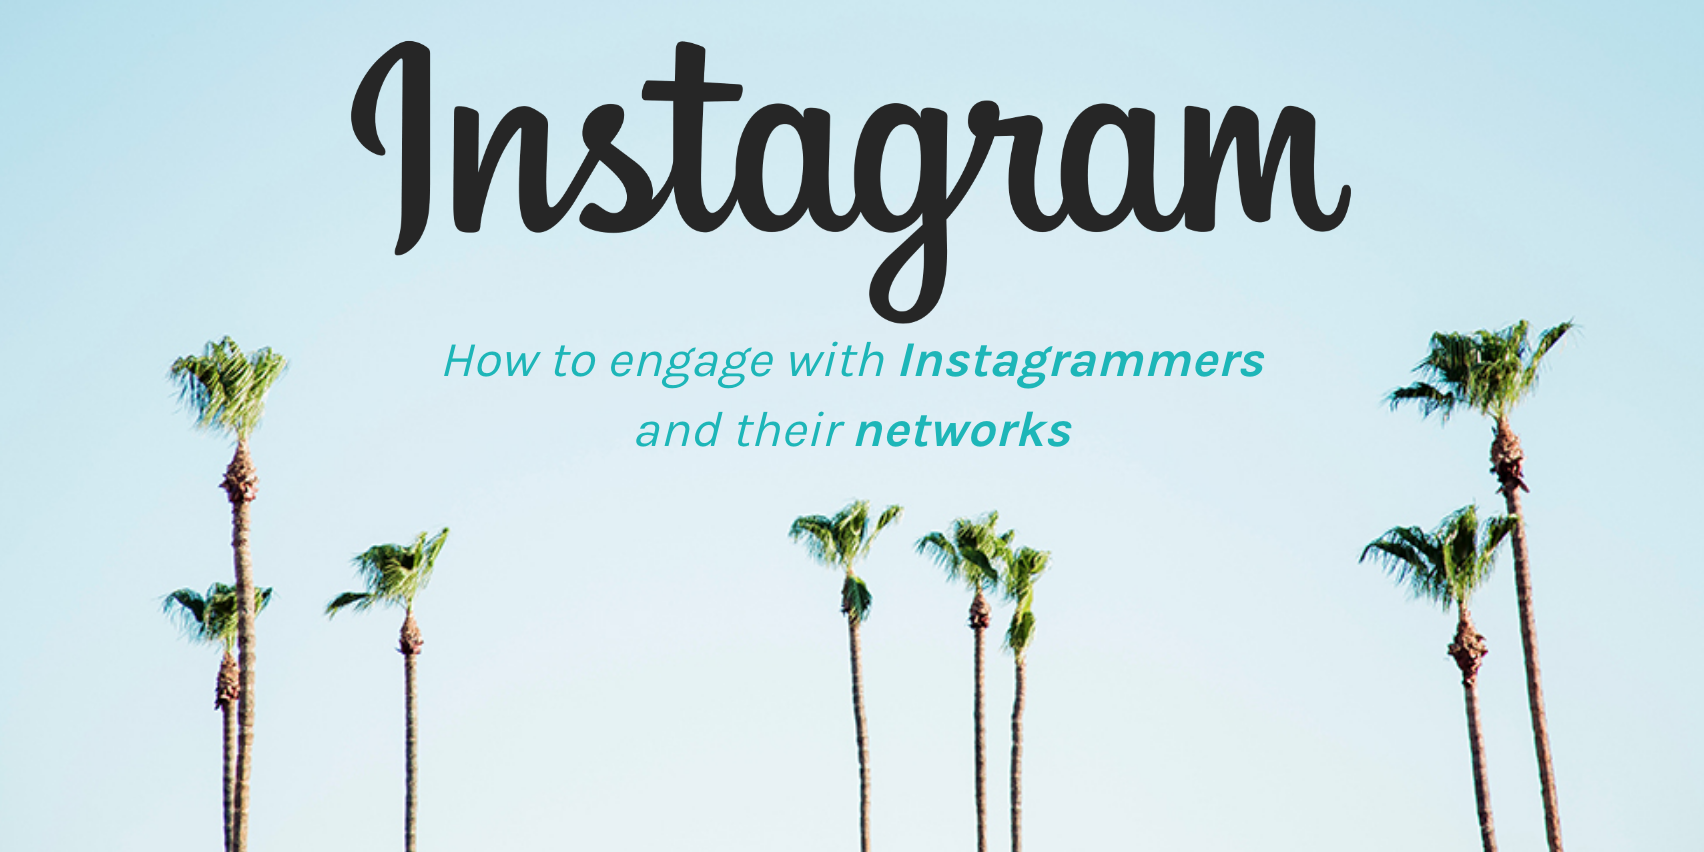 Audiense blog - How to engage with Instagrammers and their networks